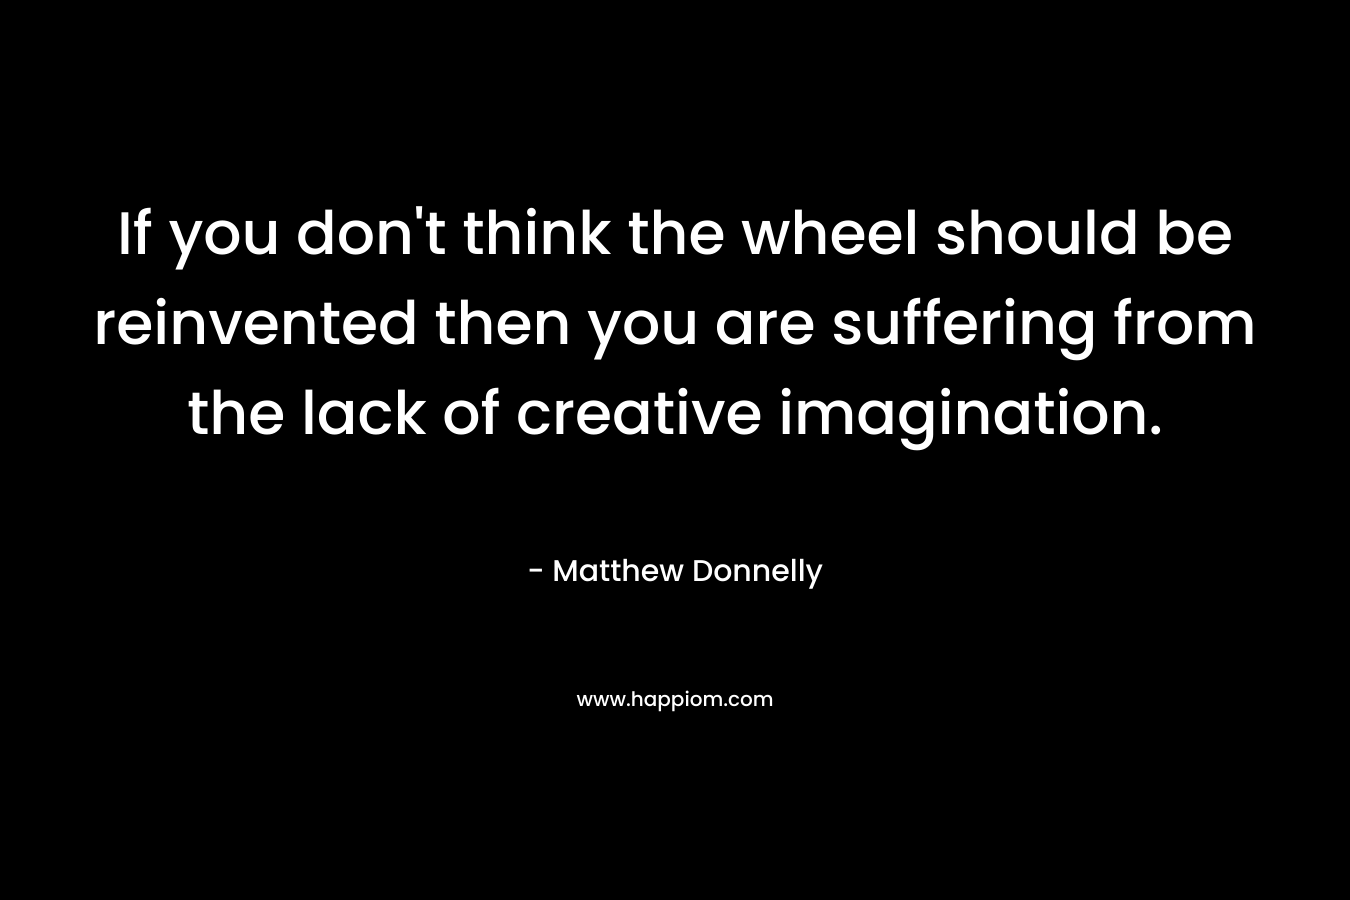 If you don't think the wheel should be reinvented then you are suffering from the lack of creative imagination.